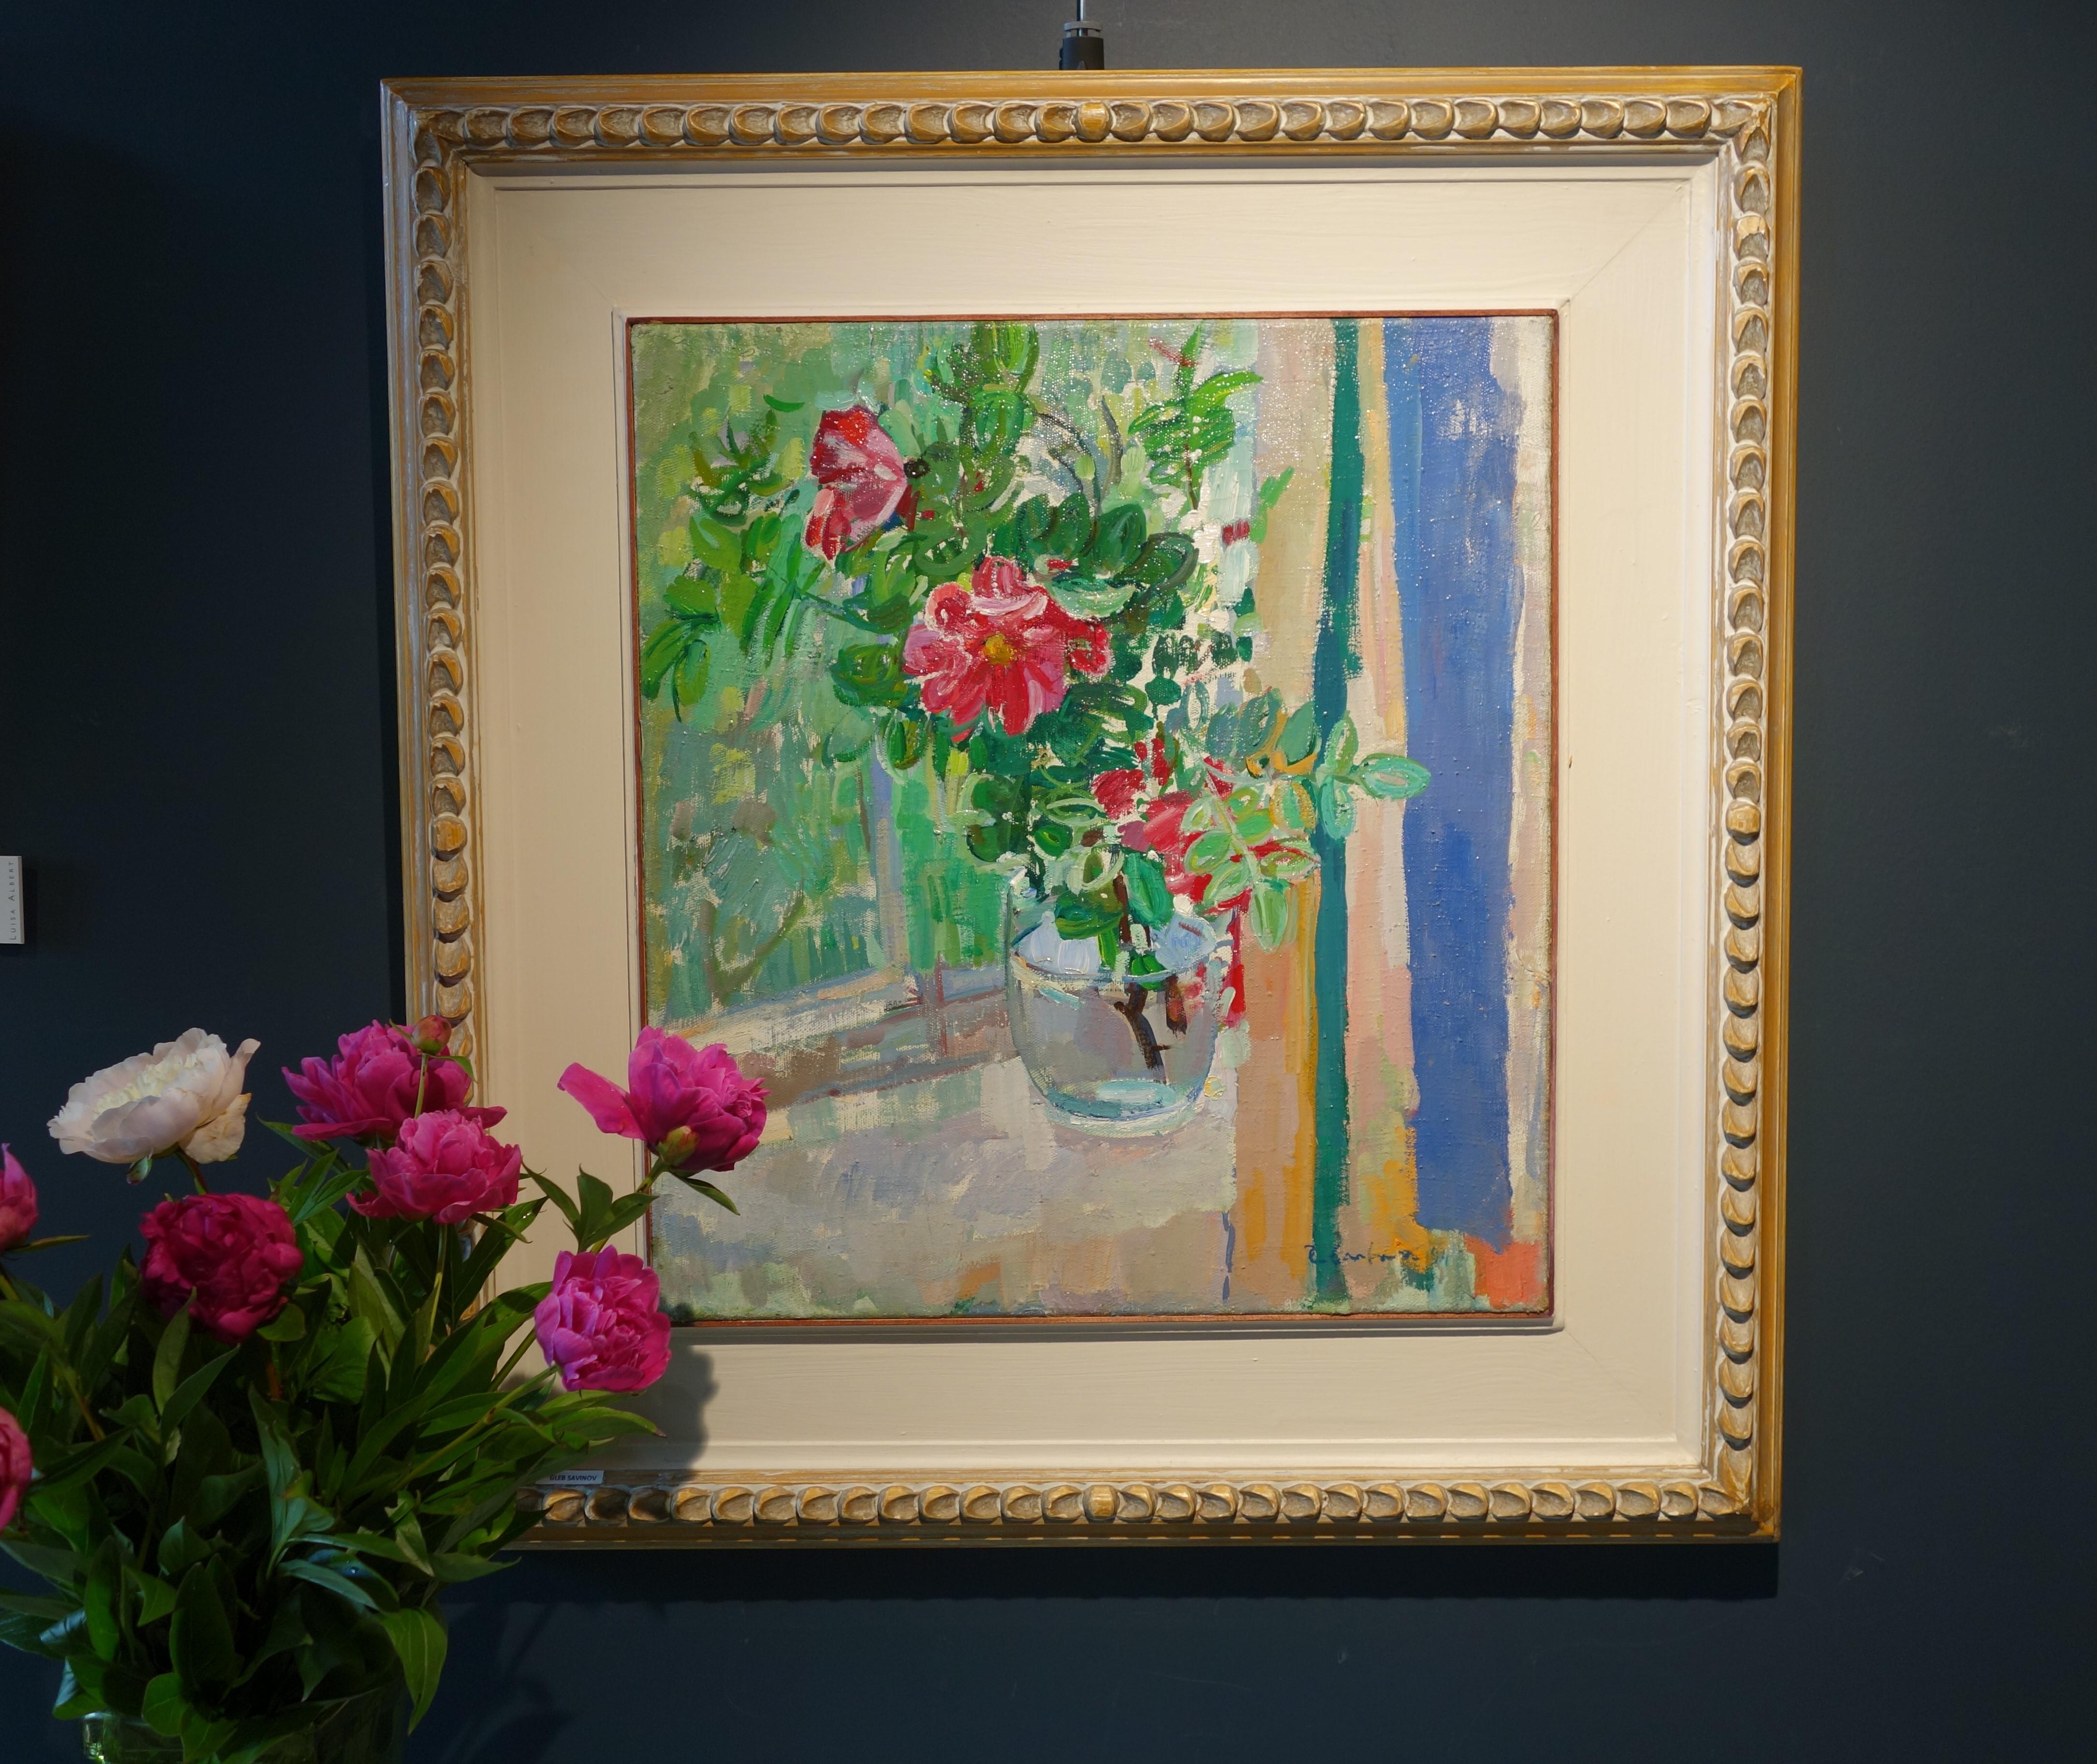 Pink ,Wild Roses ,Flowers,Window ,Spring,Russian,Impressionist

GLEB SAVINOV (Charkev, 1915 – St. Petersburg, 2000)


Works by Gleb Savinov can be found in various private collections in Europe, Japan, United States and in the following museums:
